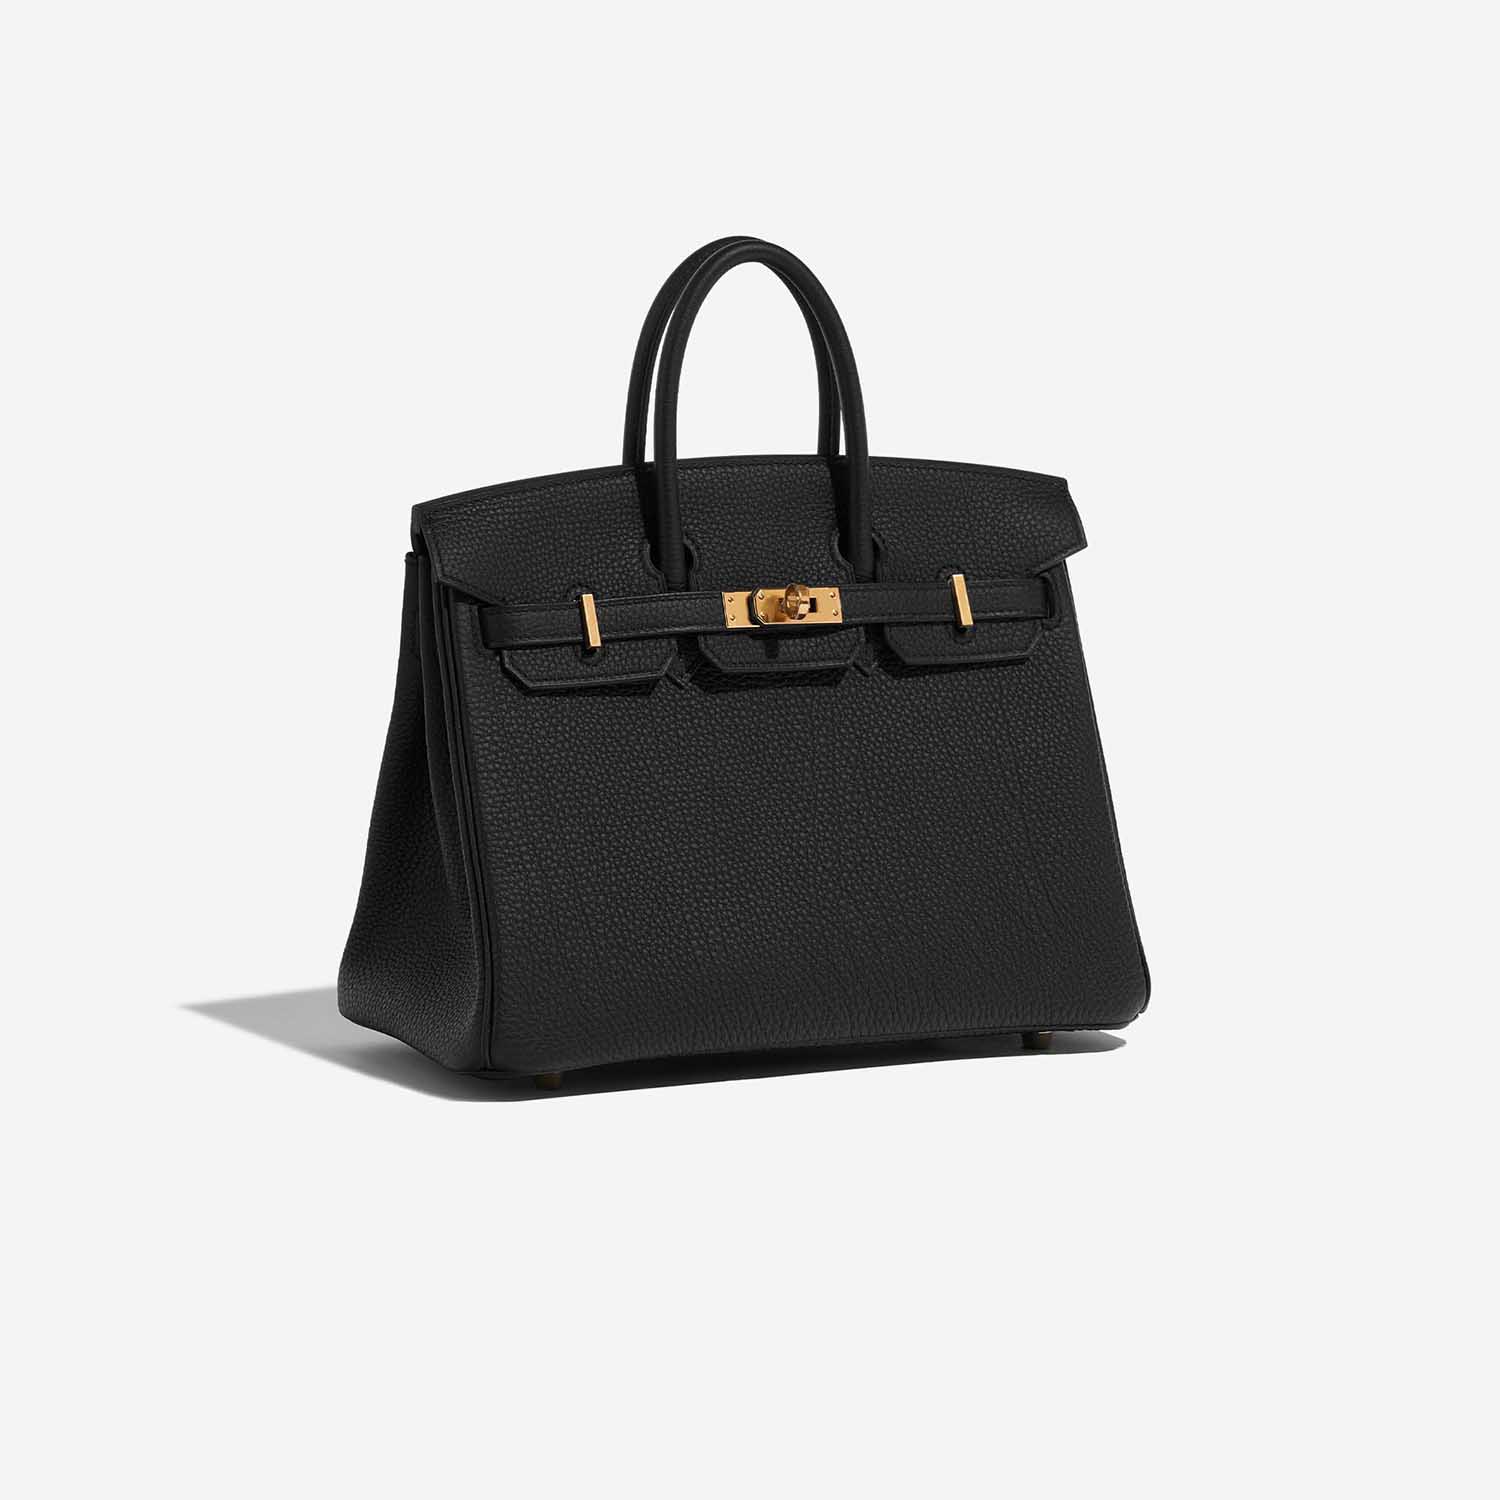 Bag of the day: A classic Brand New ✨ Birkin 25 in Black Togo